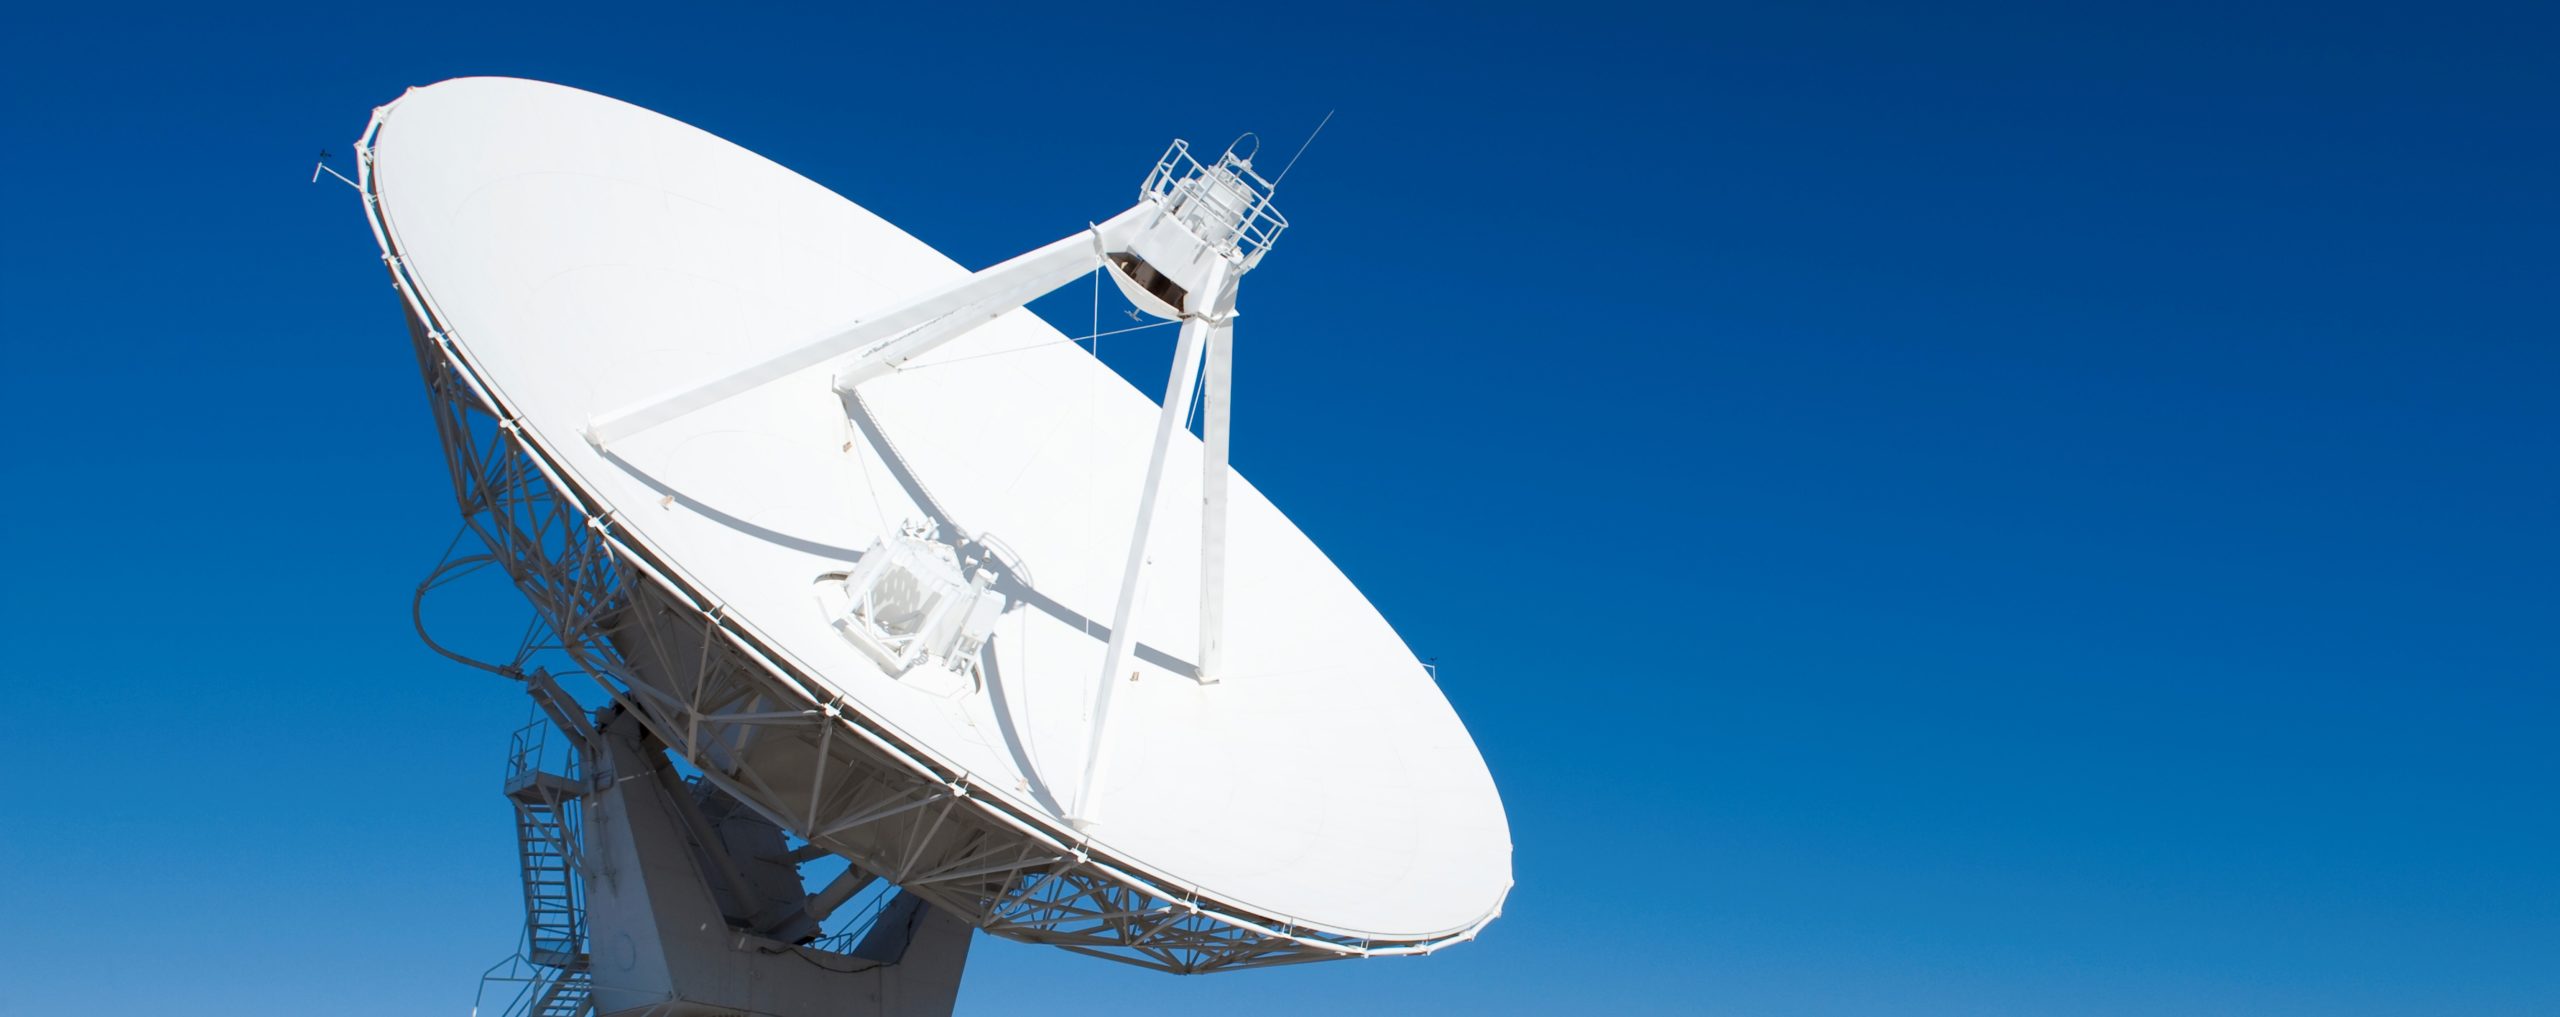 Radio telescope dish transmitting and receiving frequencies